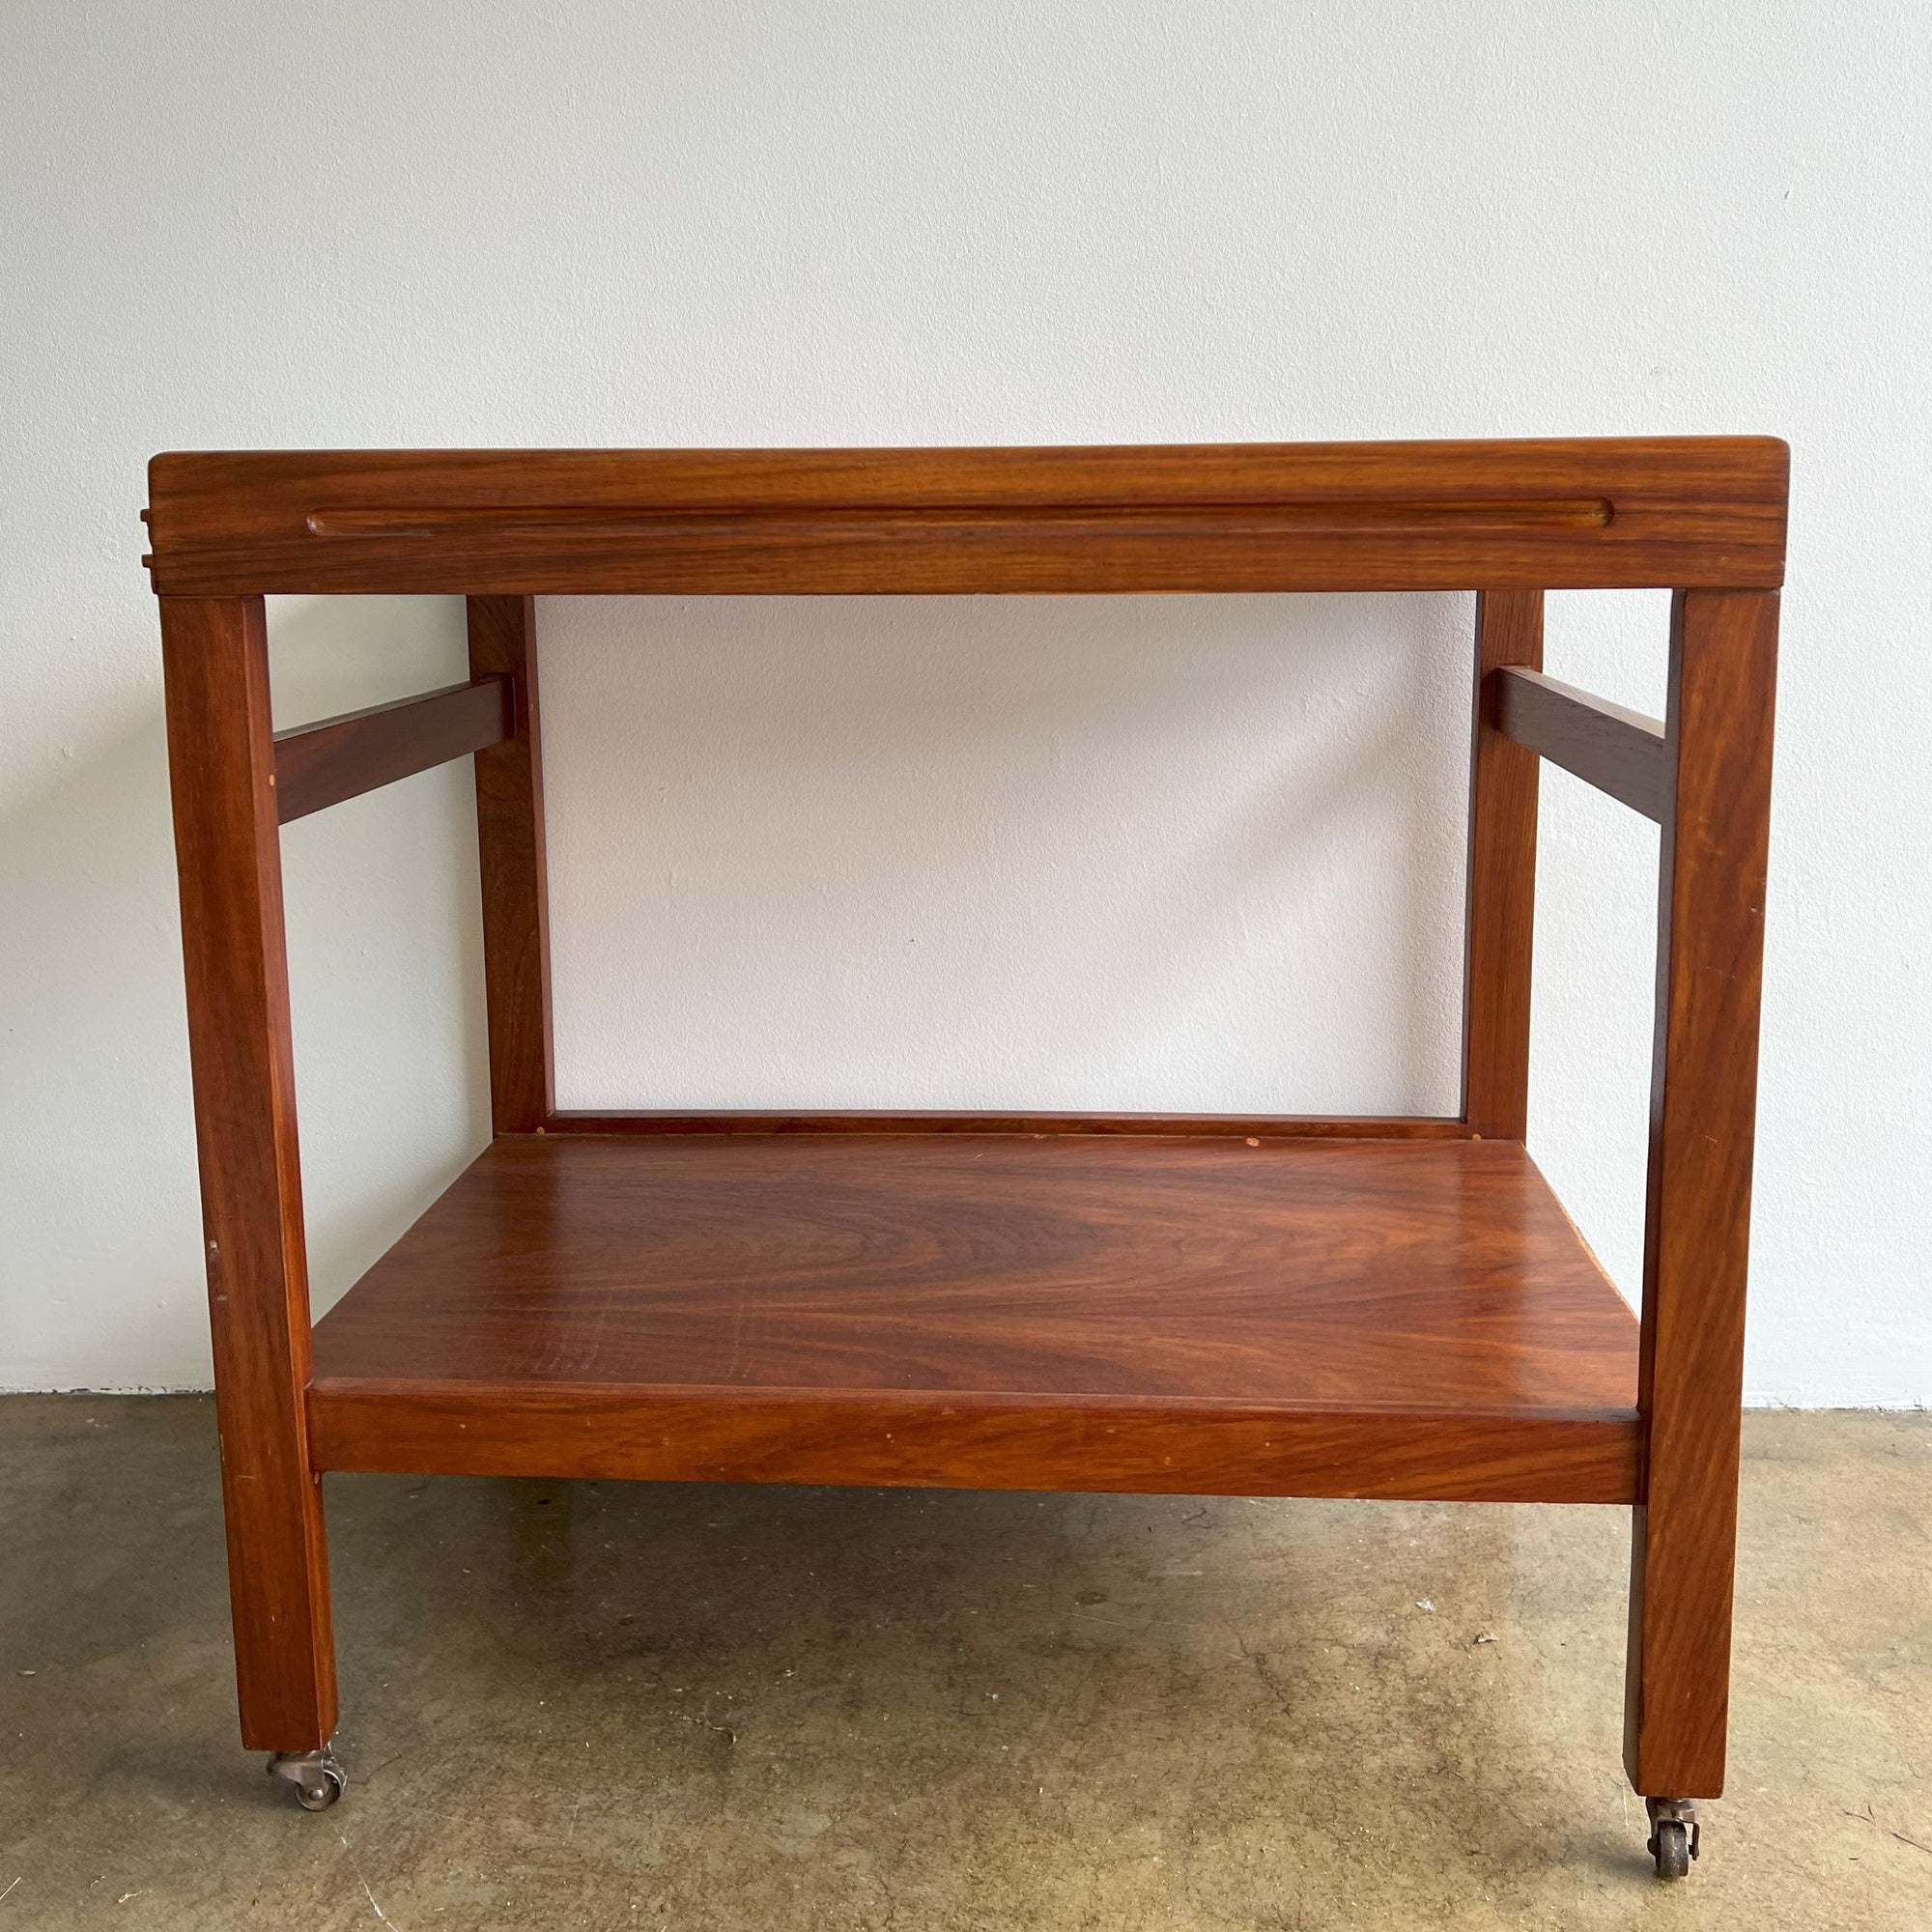 Rectangular Drinks Trolley - The Finishing Store South Africa